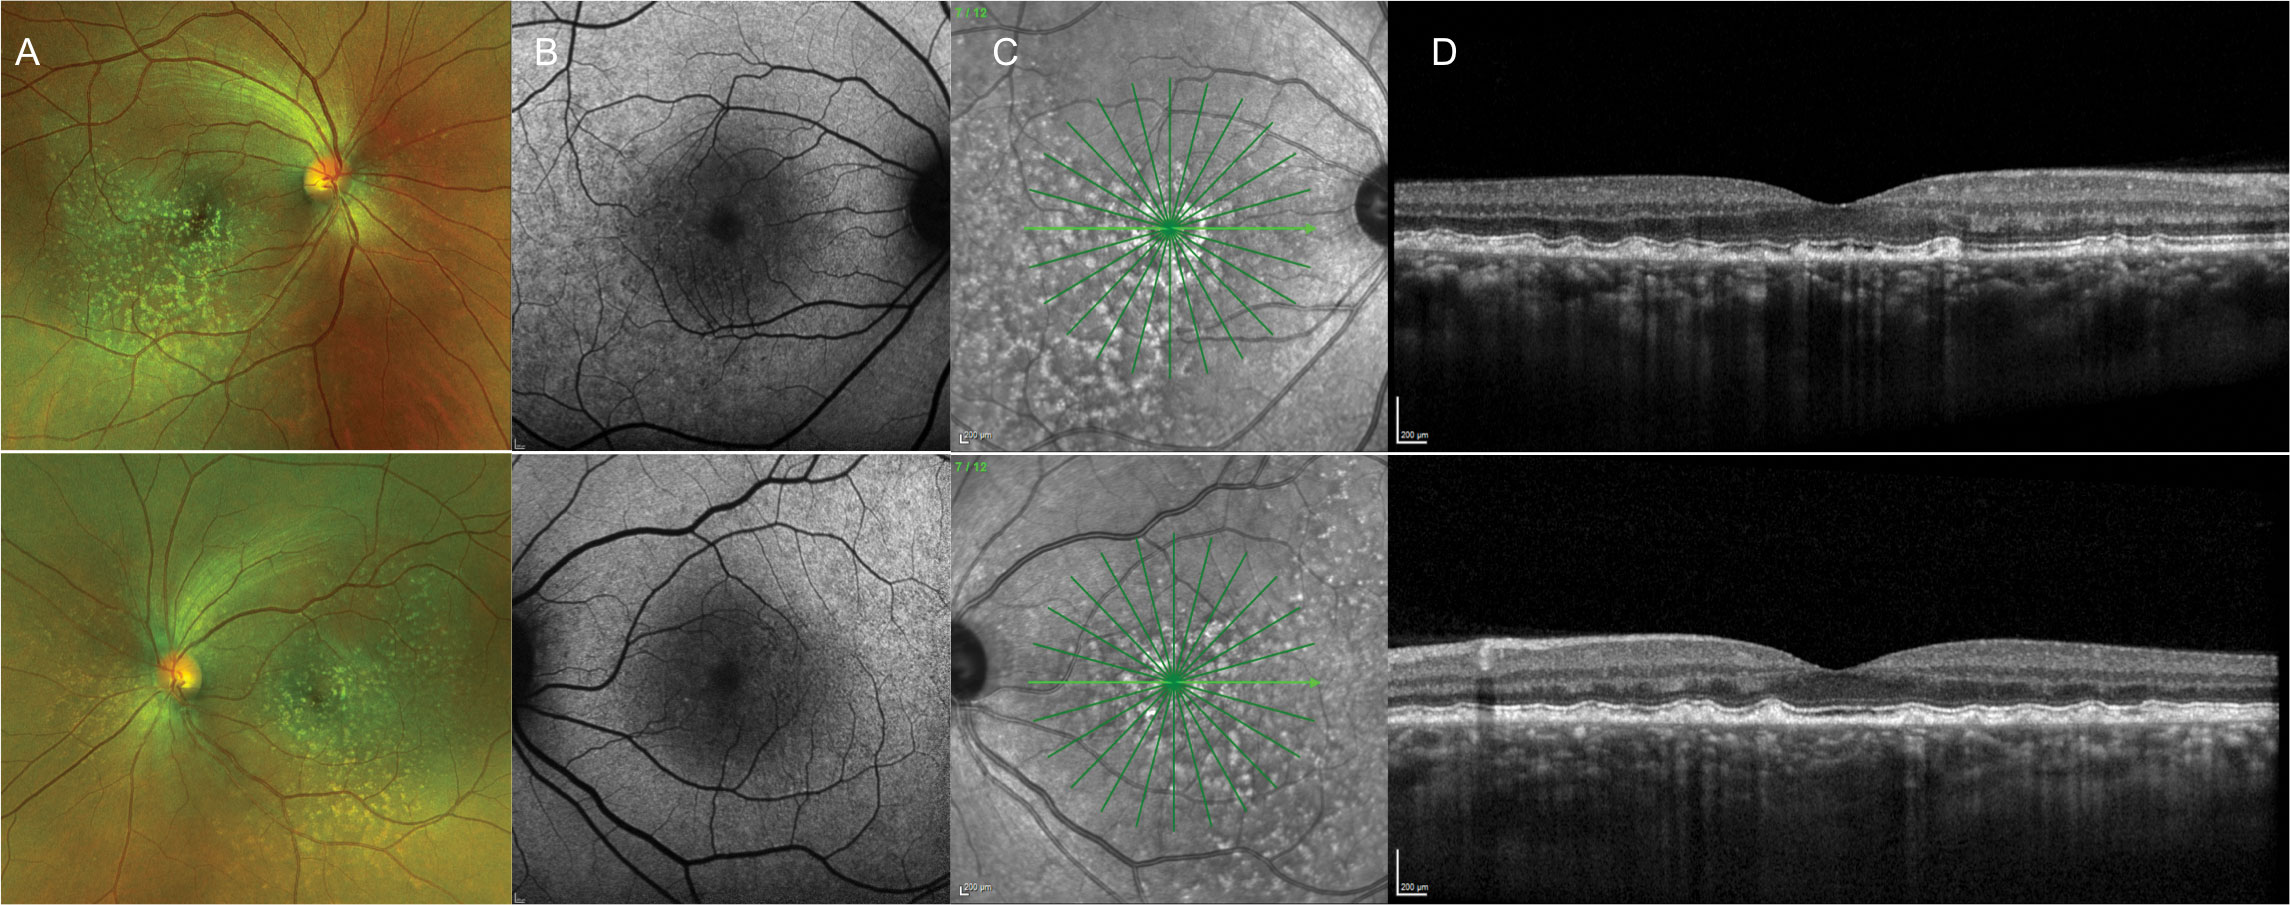 A 42-year-old Black male presented with a phenotypic appearance of autosomal dominant drusen. He had no family history and presented asymptomatically with 20/20 vision OD and OS. Images: (A) widefield photo, (B) FAF, (C) infrared reflectance and (D) OCT.